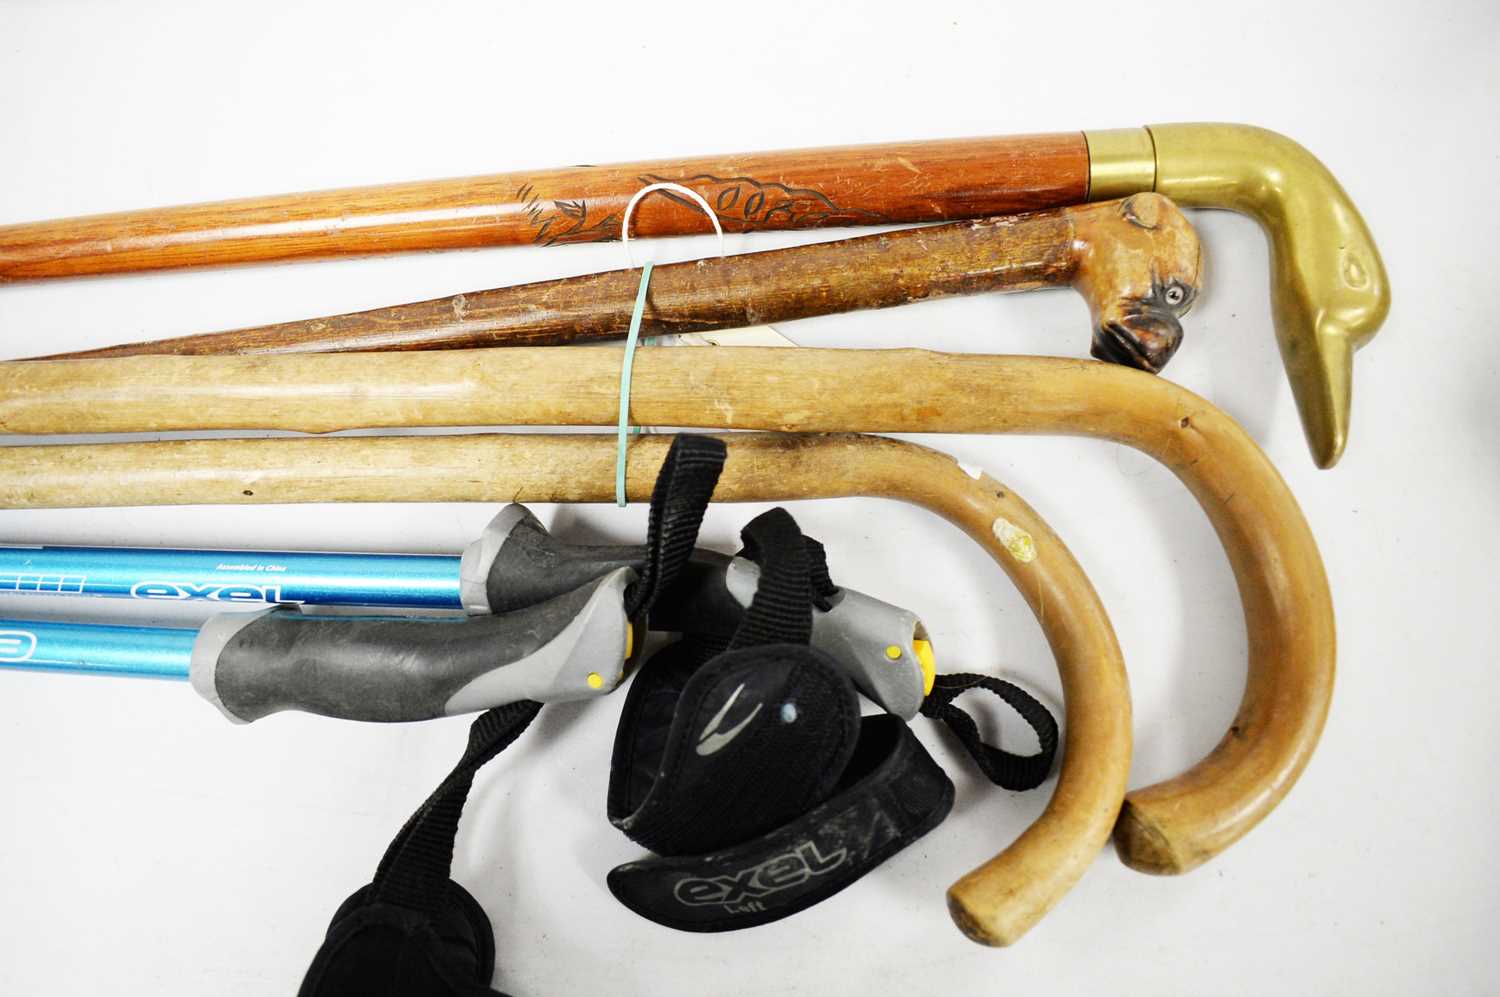 Selection of walking sticks and poles